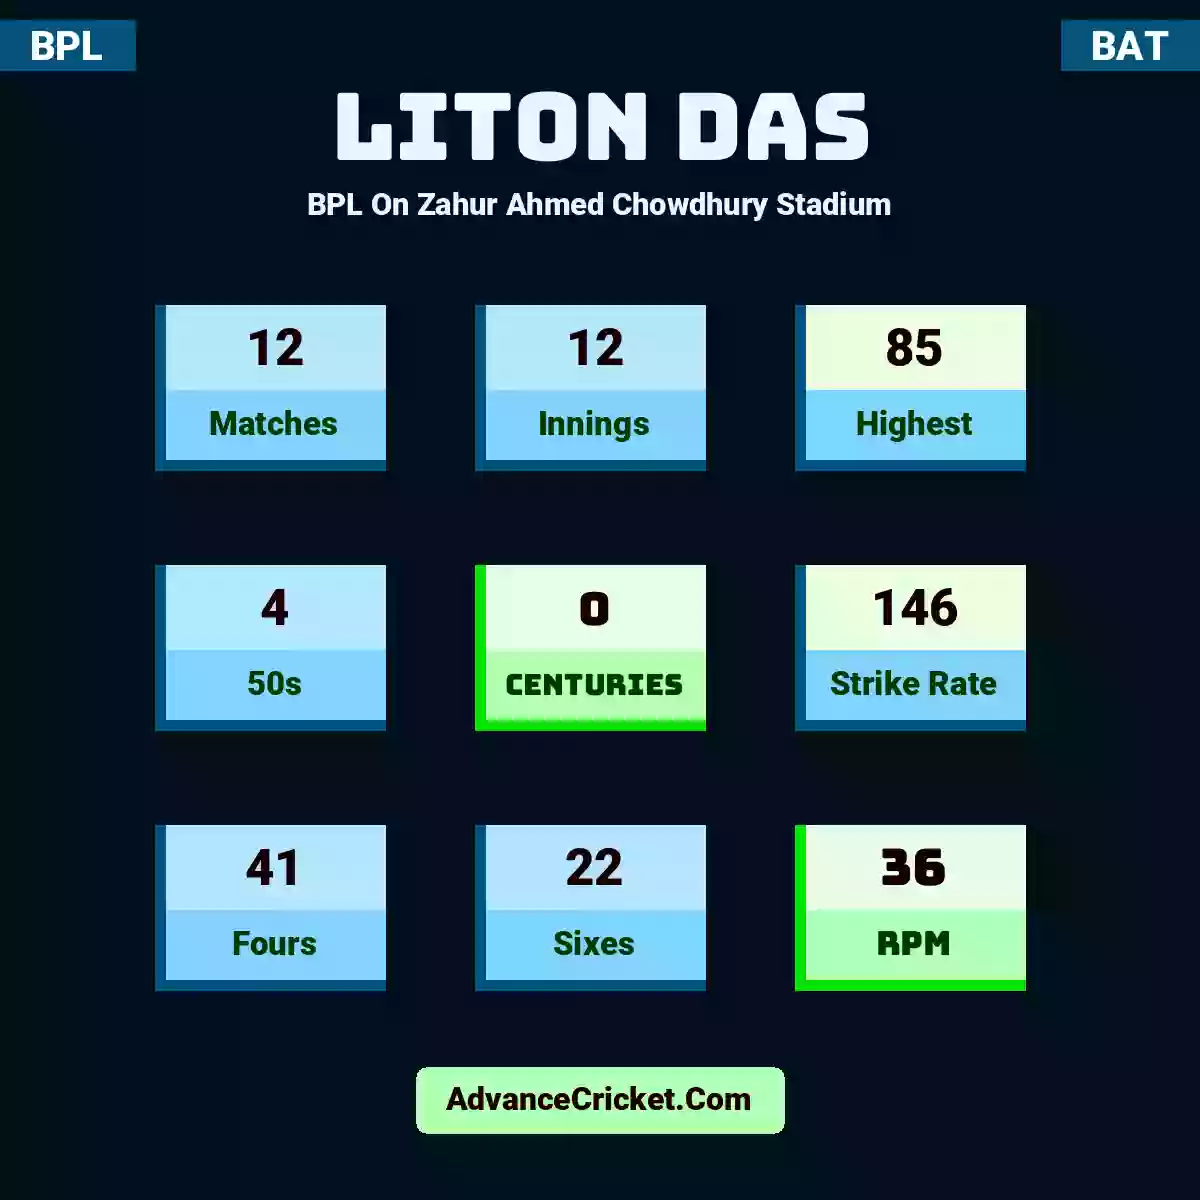 Liton Das BPL  On Zahur Ahmed Chowdhury Stadium, Liton Das played 12 matches, scored 85 runs as highest, 4 half-centuries, and 0 centuries, with a strike rate of 146. L.Das hit 41 fours and 22 sixes, with an RPM of 36.